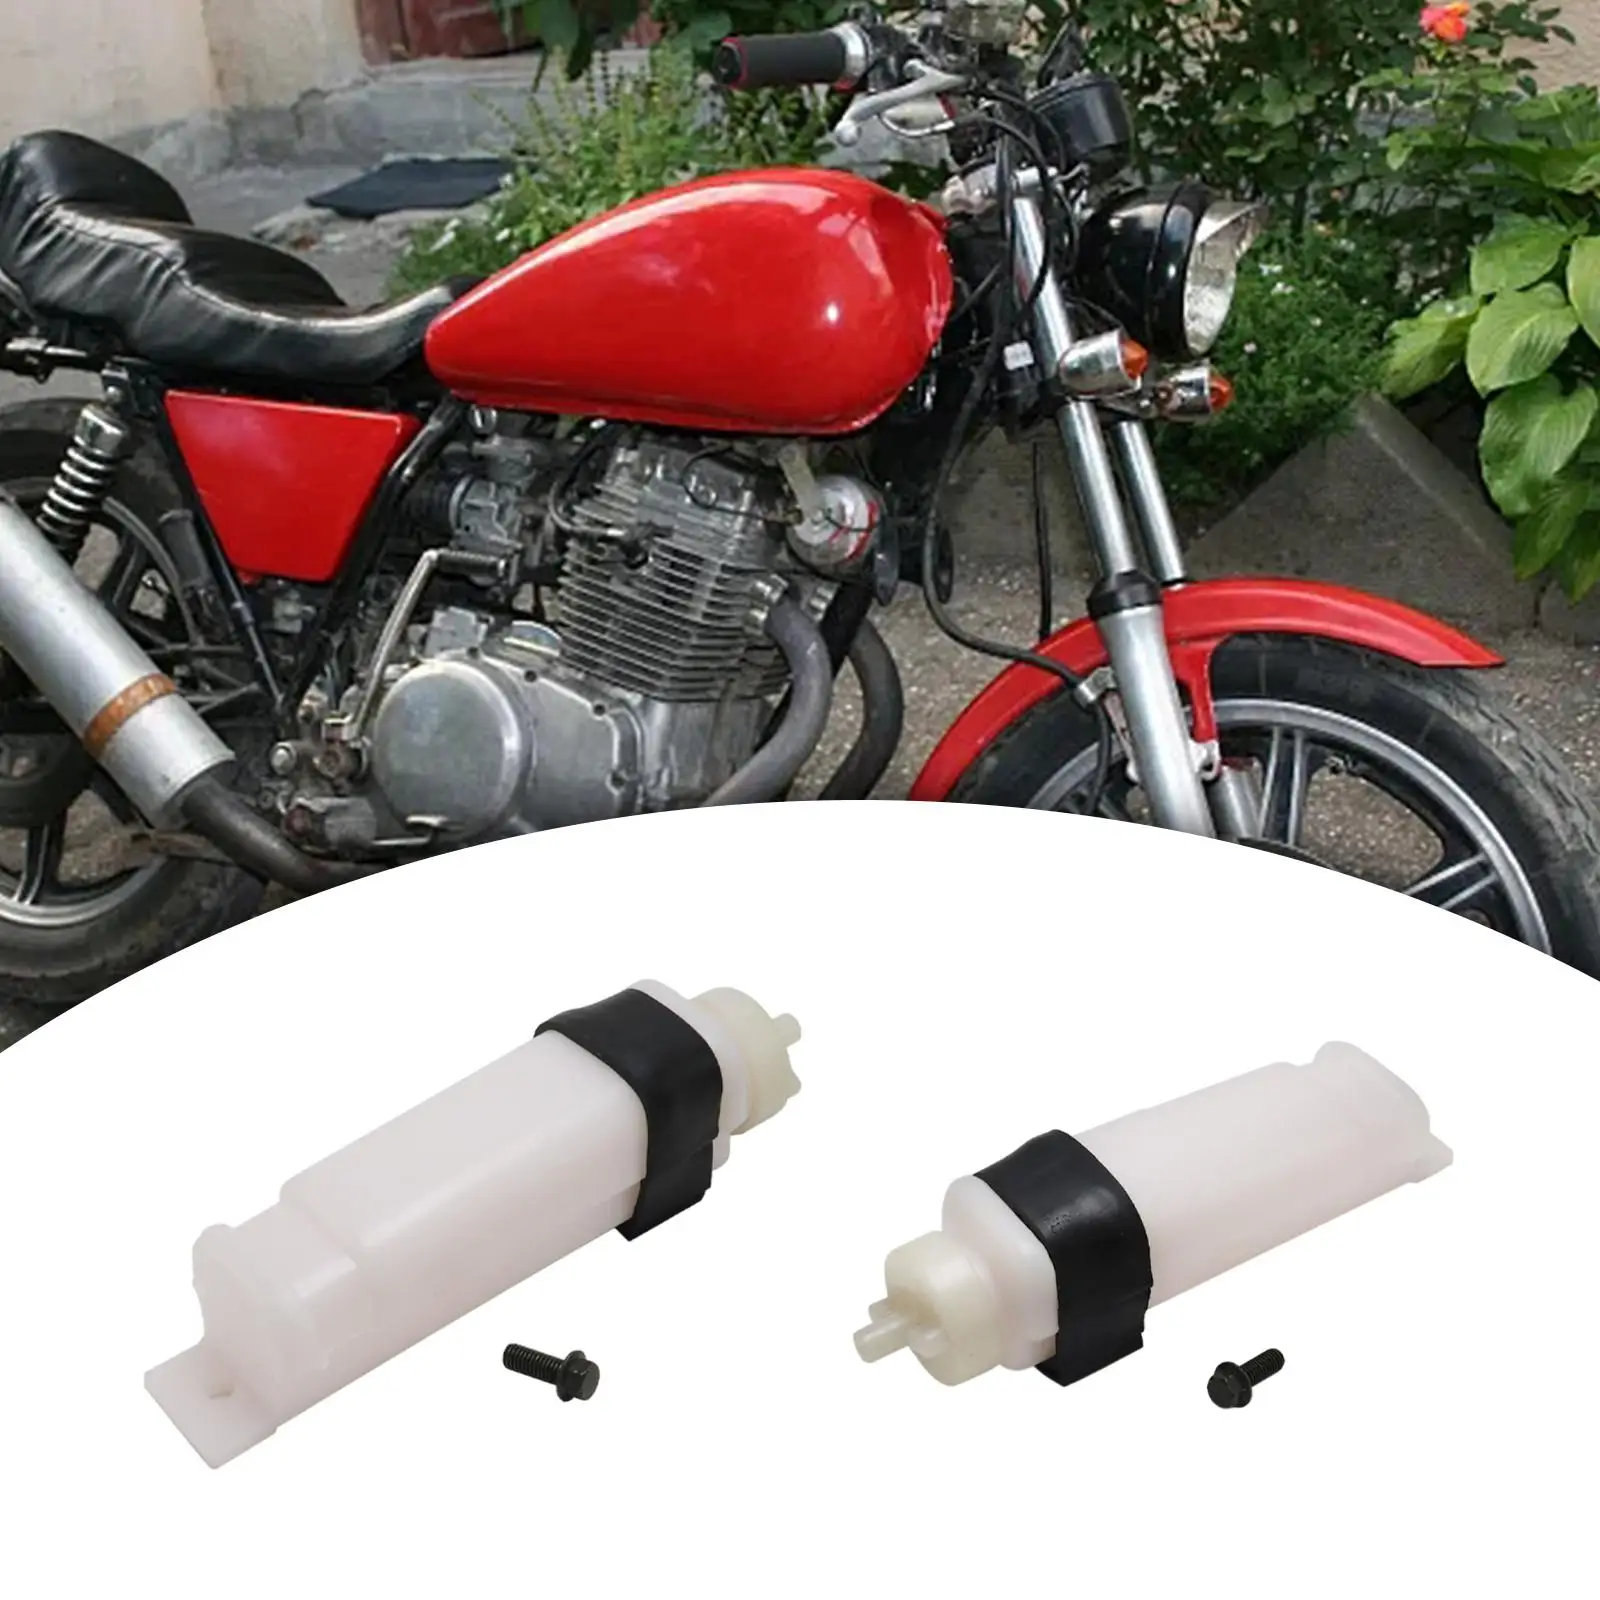 Cooling Water Tank Antifreeze 150cc 200cc 250cc Premium Motorcycle Accessories Parts Durable for Motorcycle Lifan Zongshen